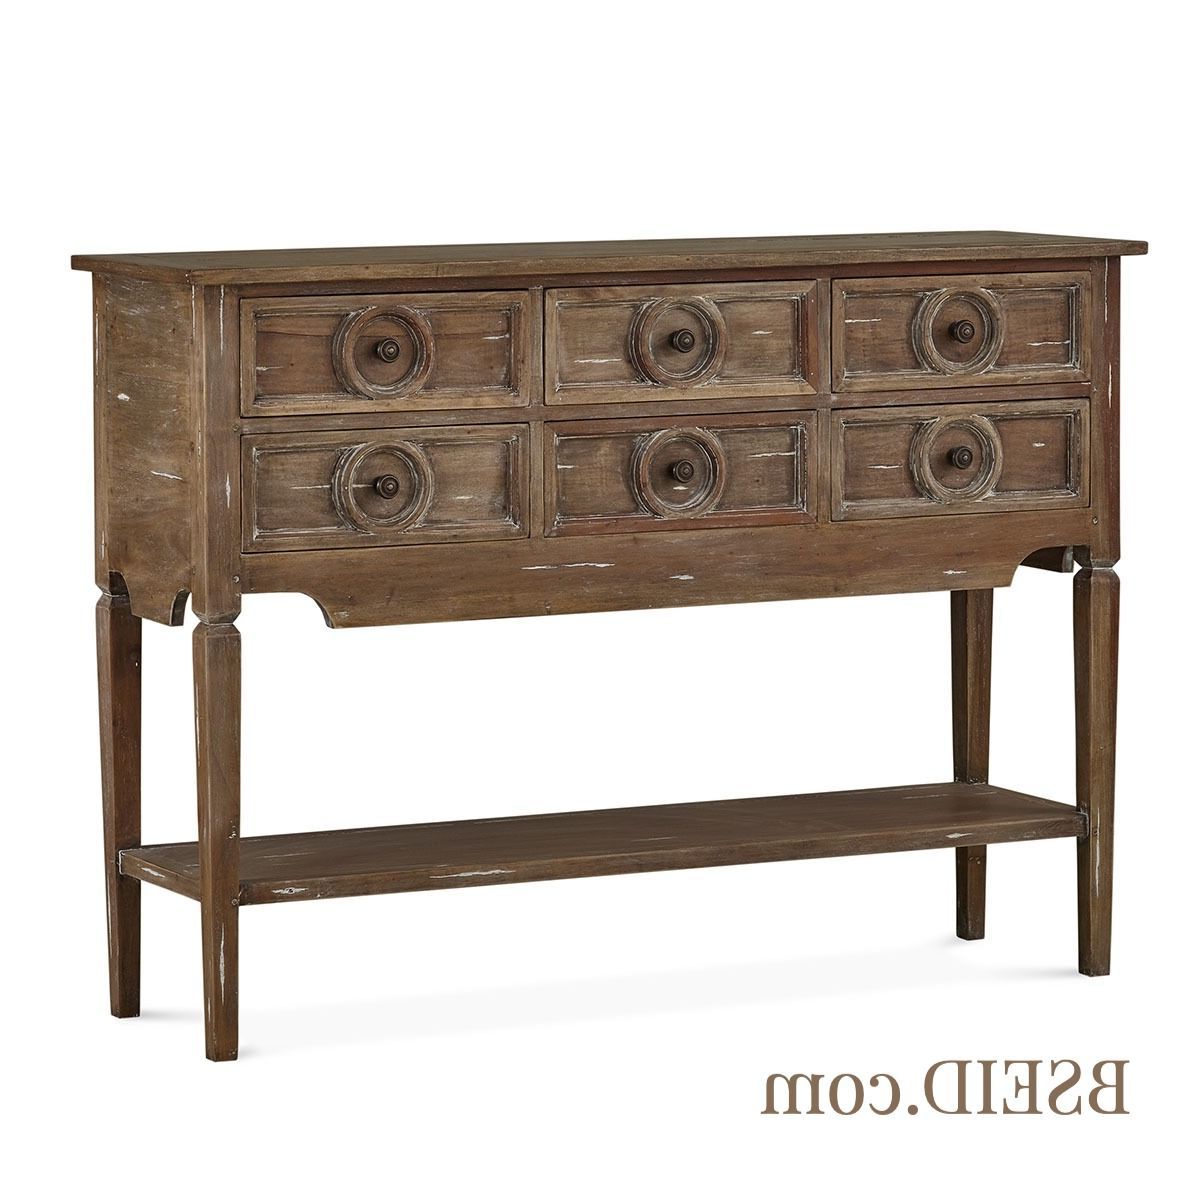 Lorraine 48" Wide 2 Drawer Acacia Wood Drawer Servers Pertaining To Most Up To Date Pinbseid – Designer Curated H On Transitional (View 13 of 17)